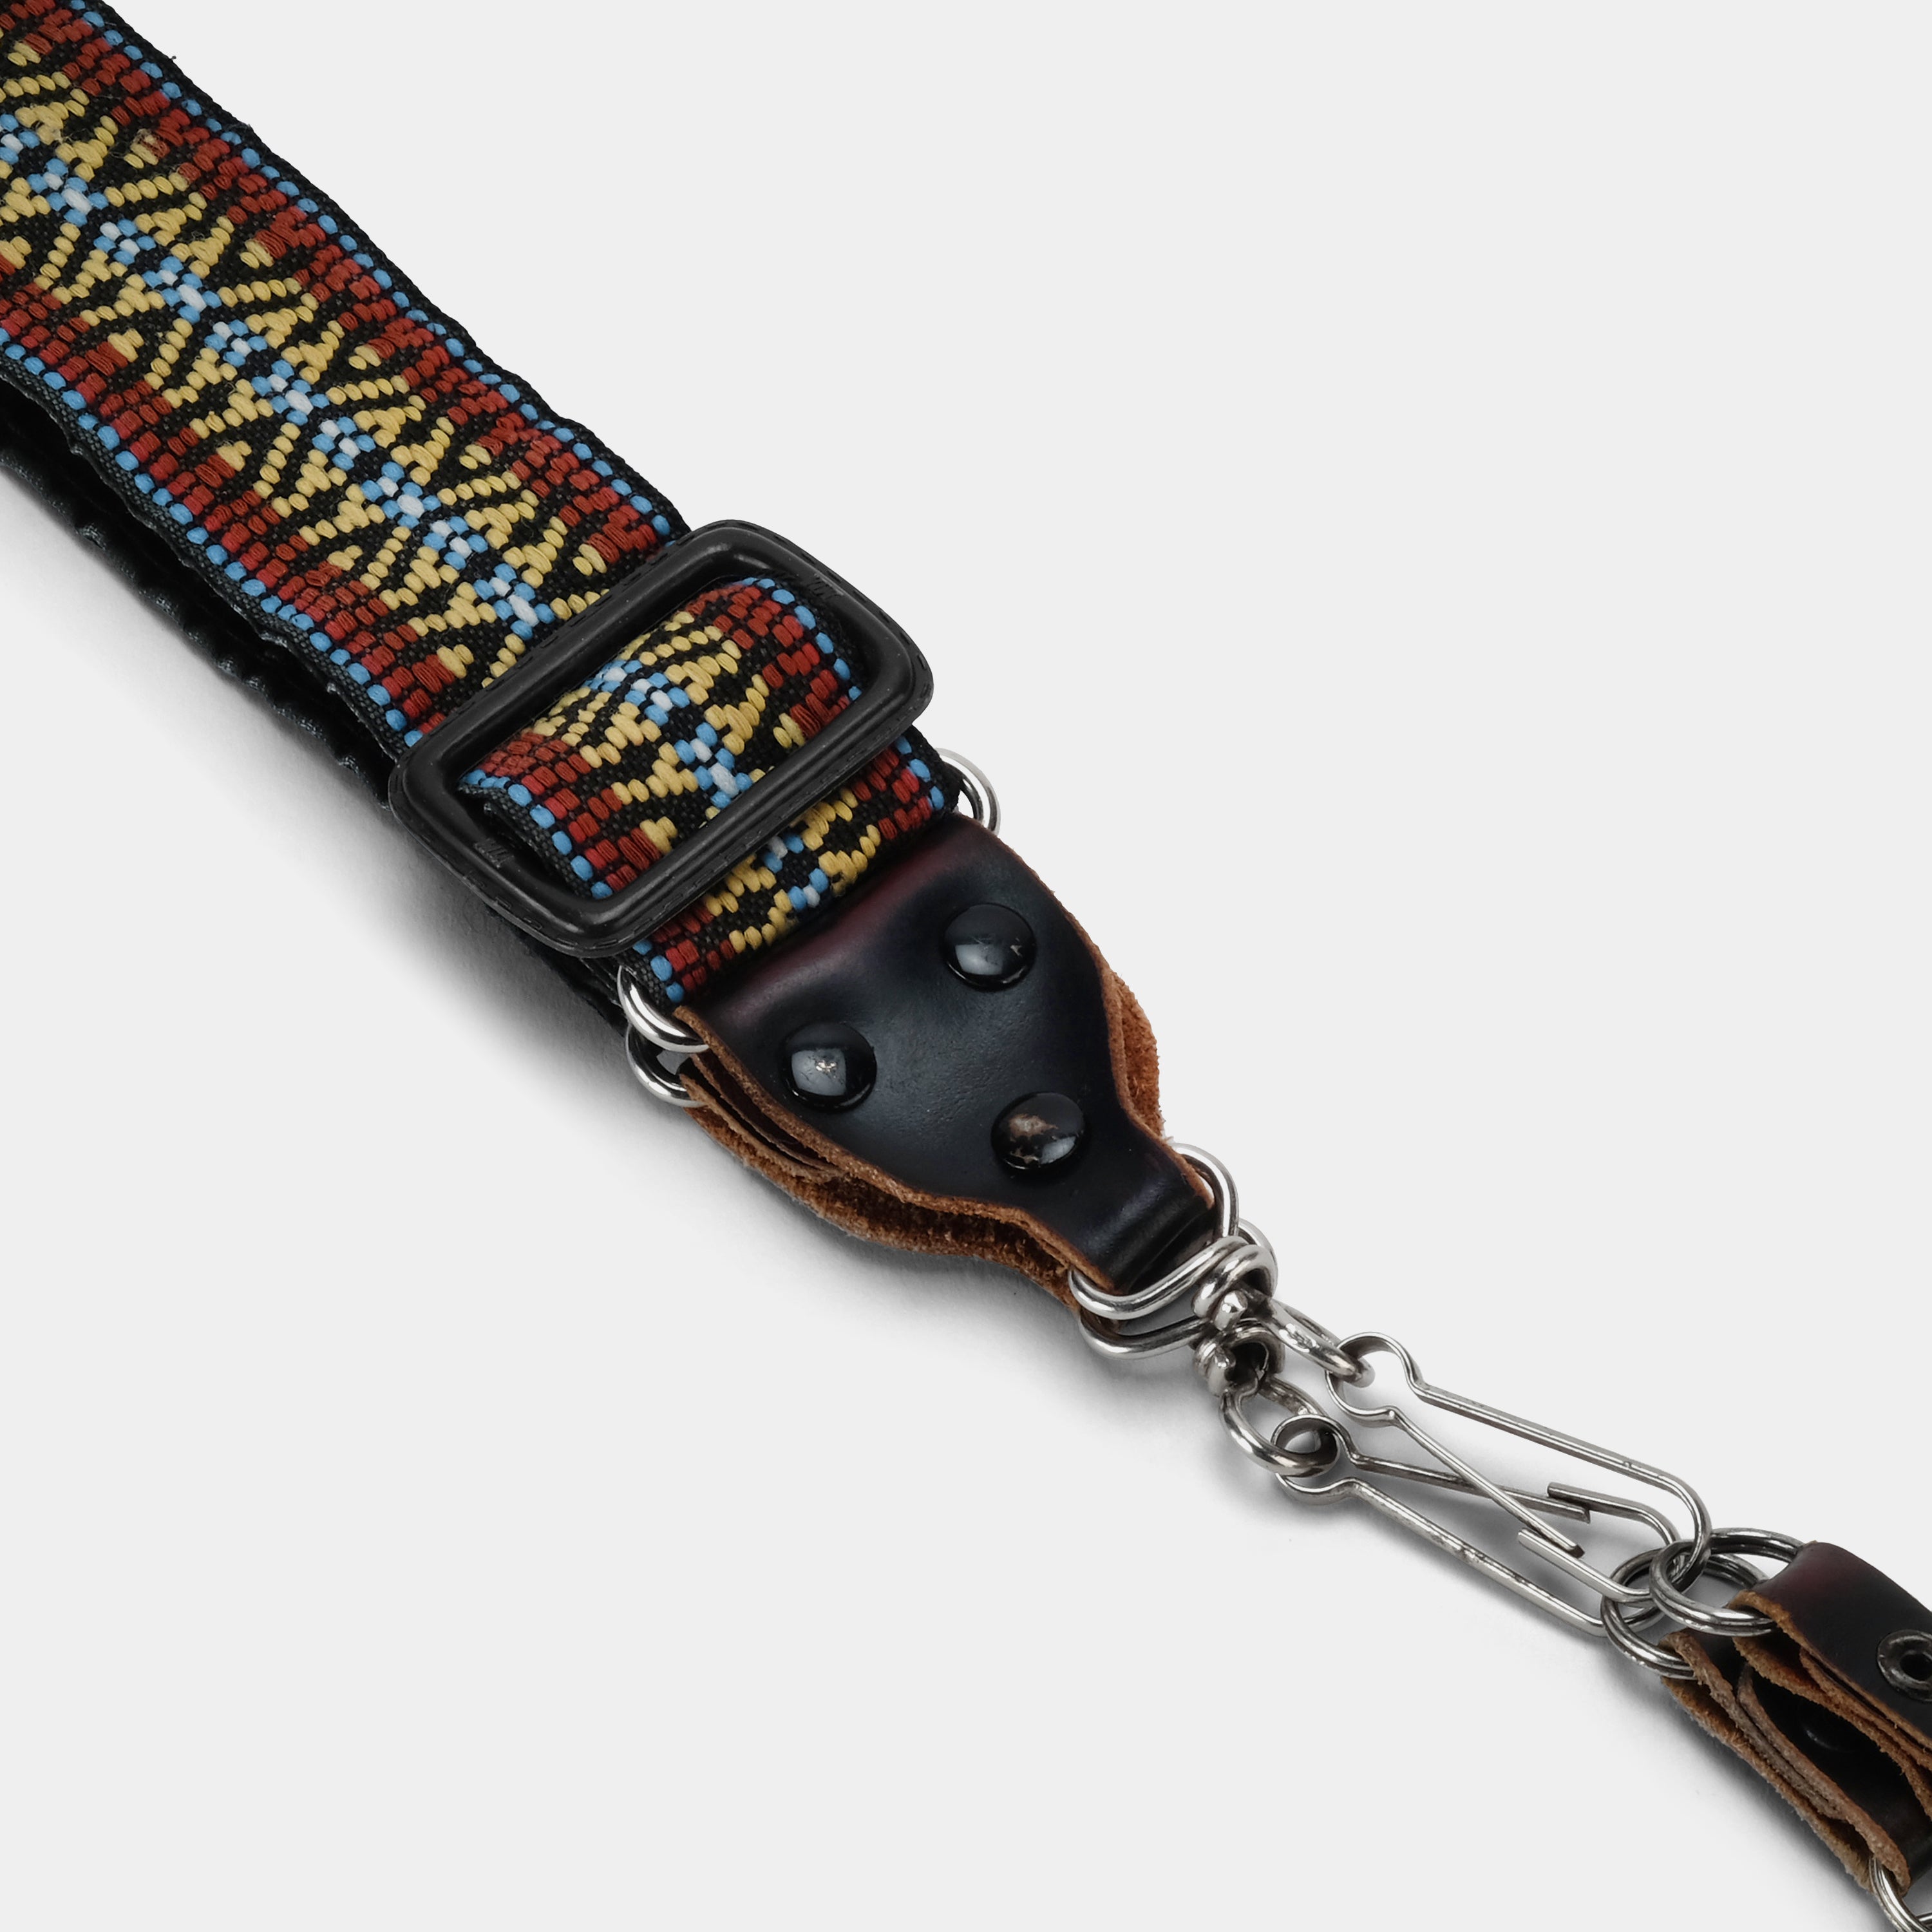 Vintage Red, Yellow and Blue Patterned Hippie Camera Strap